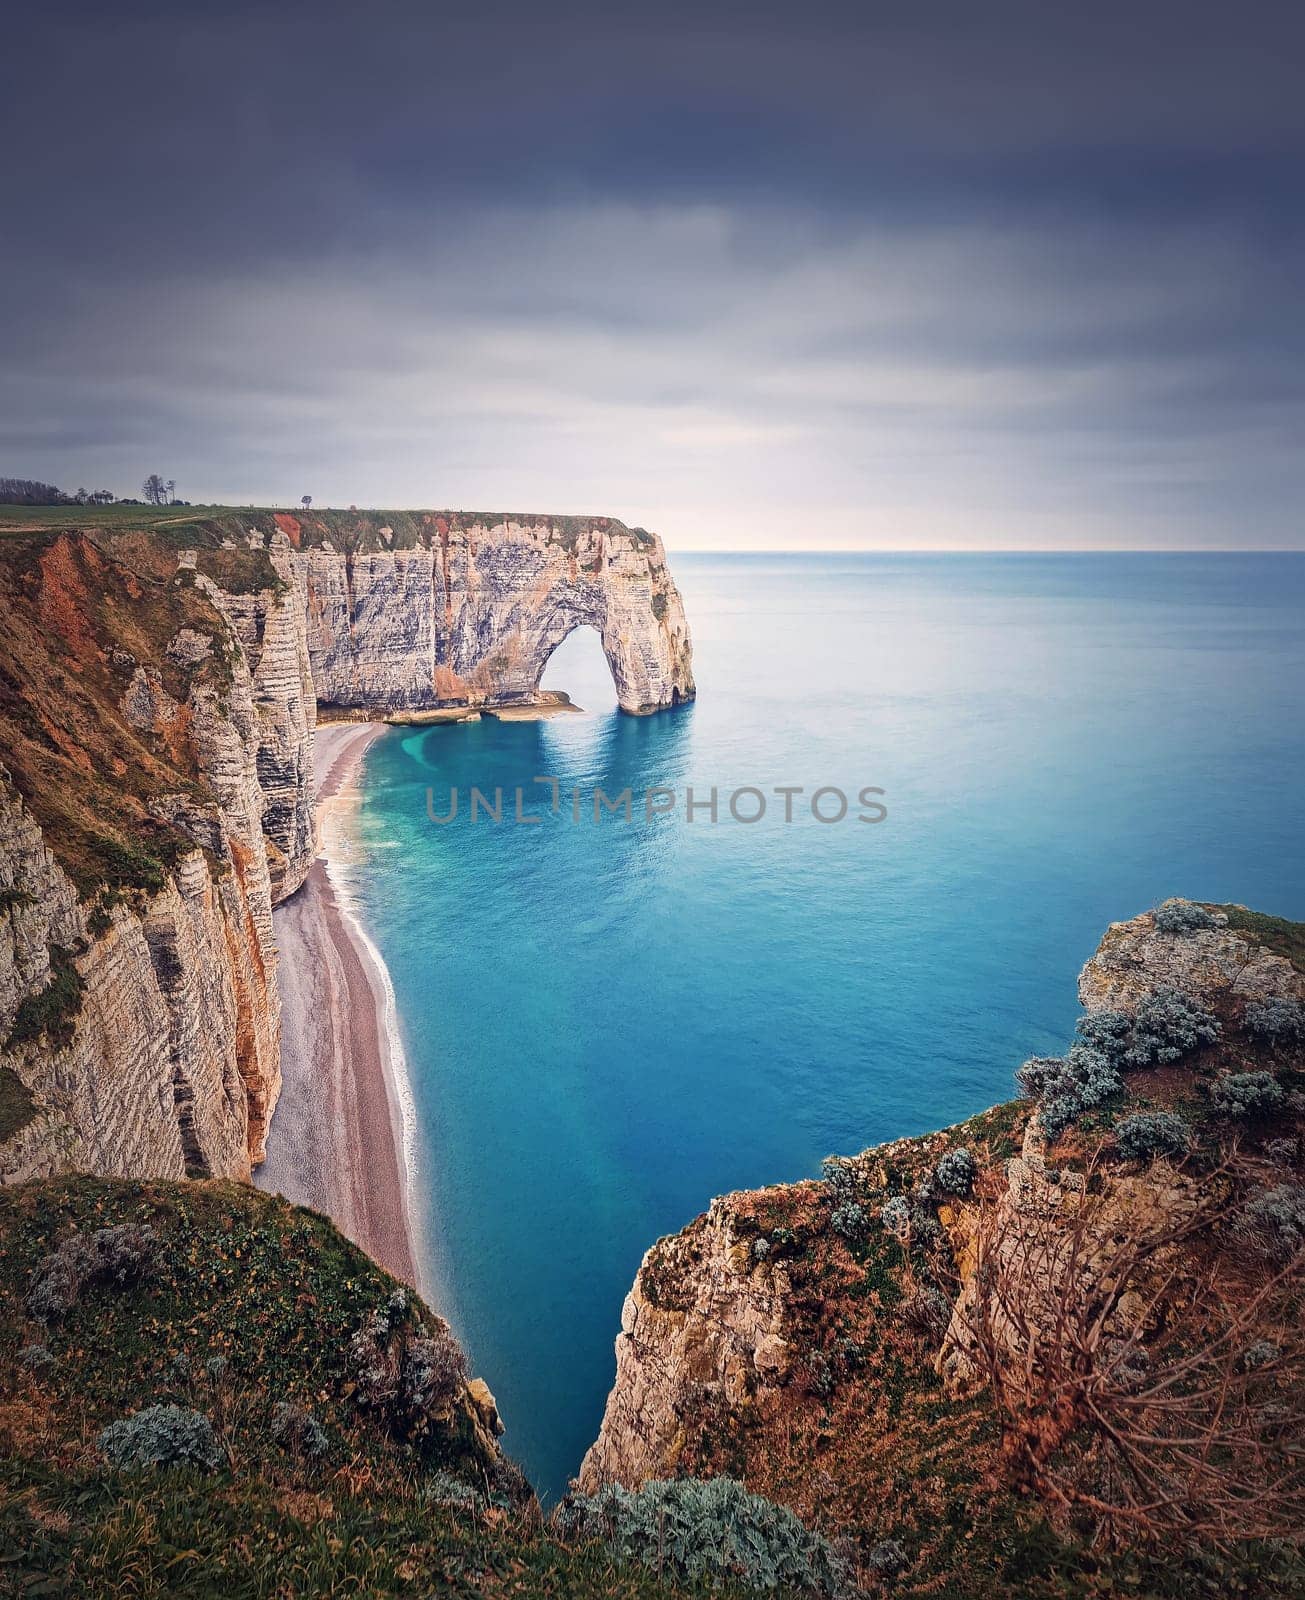 Idyllic view to Porte d'Aval natural arch at Etretat famous cliffs washed by Atlantic ocean, Normandy, France. Sightseeing coastline scenery, beautiful natural bay with sand beach by psychoshadow